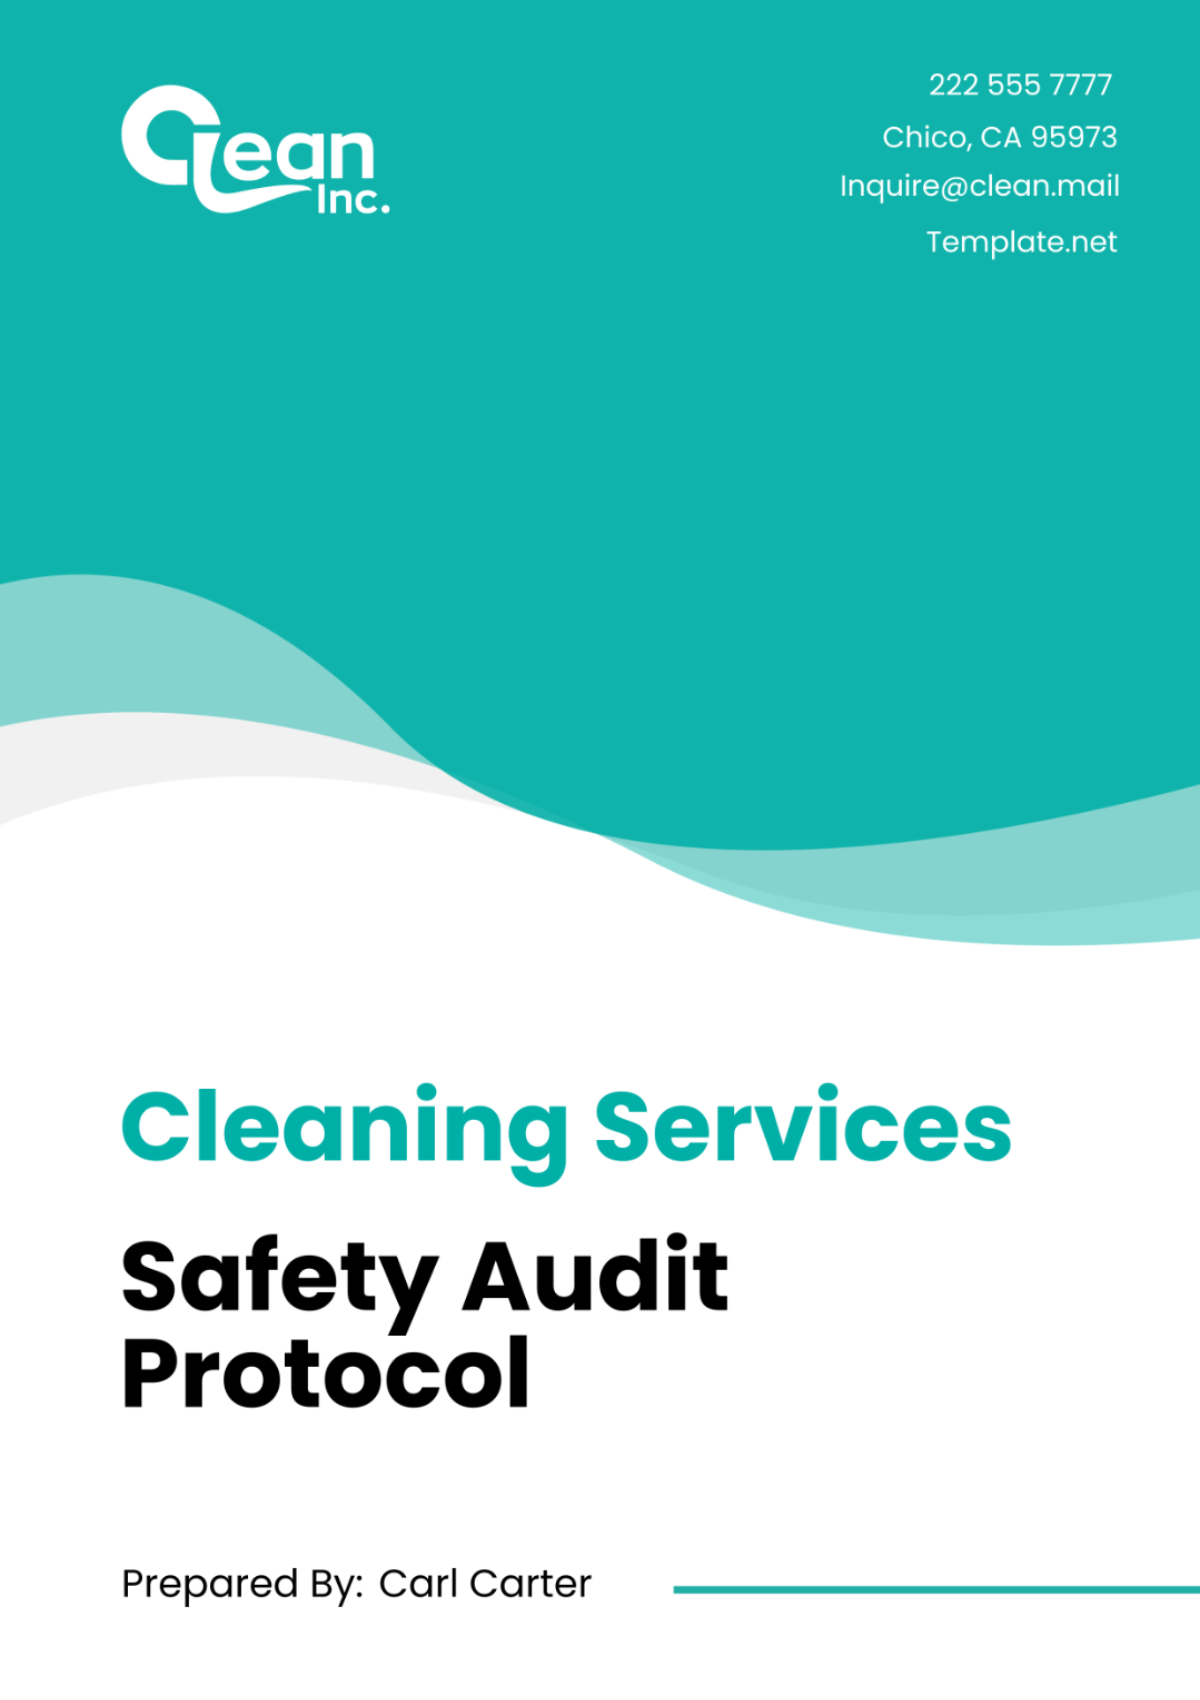 Cleaning Services Safety Audit Protocol Template